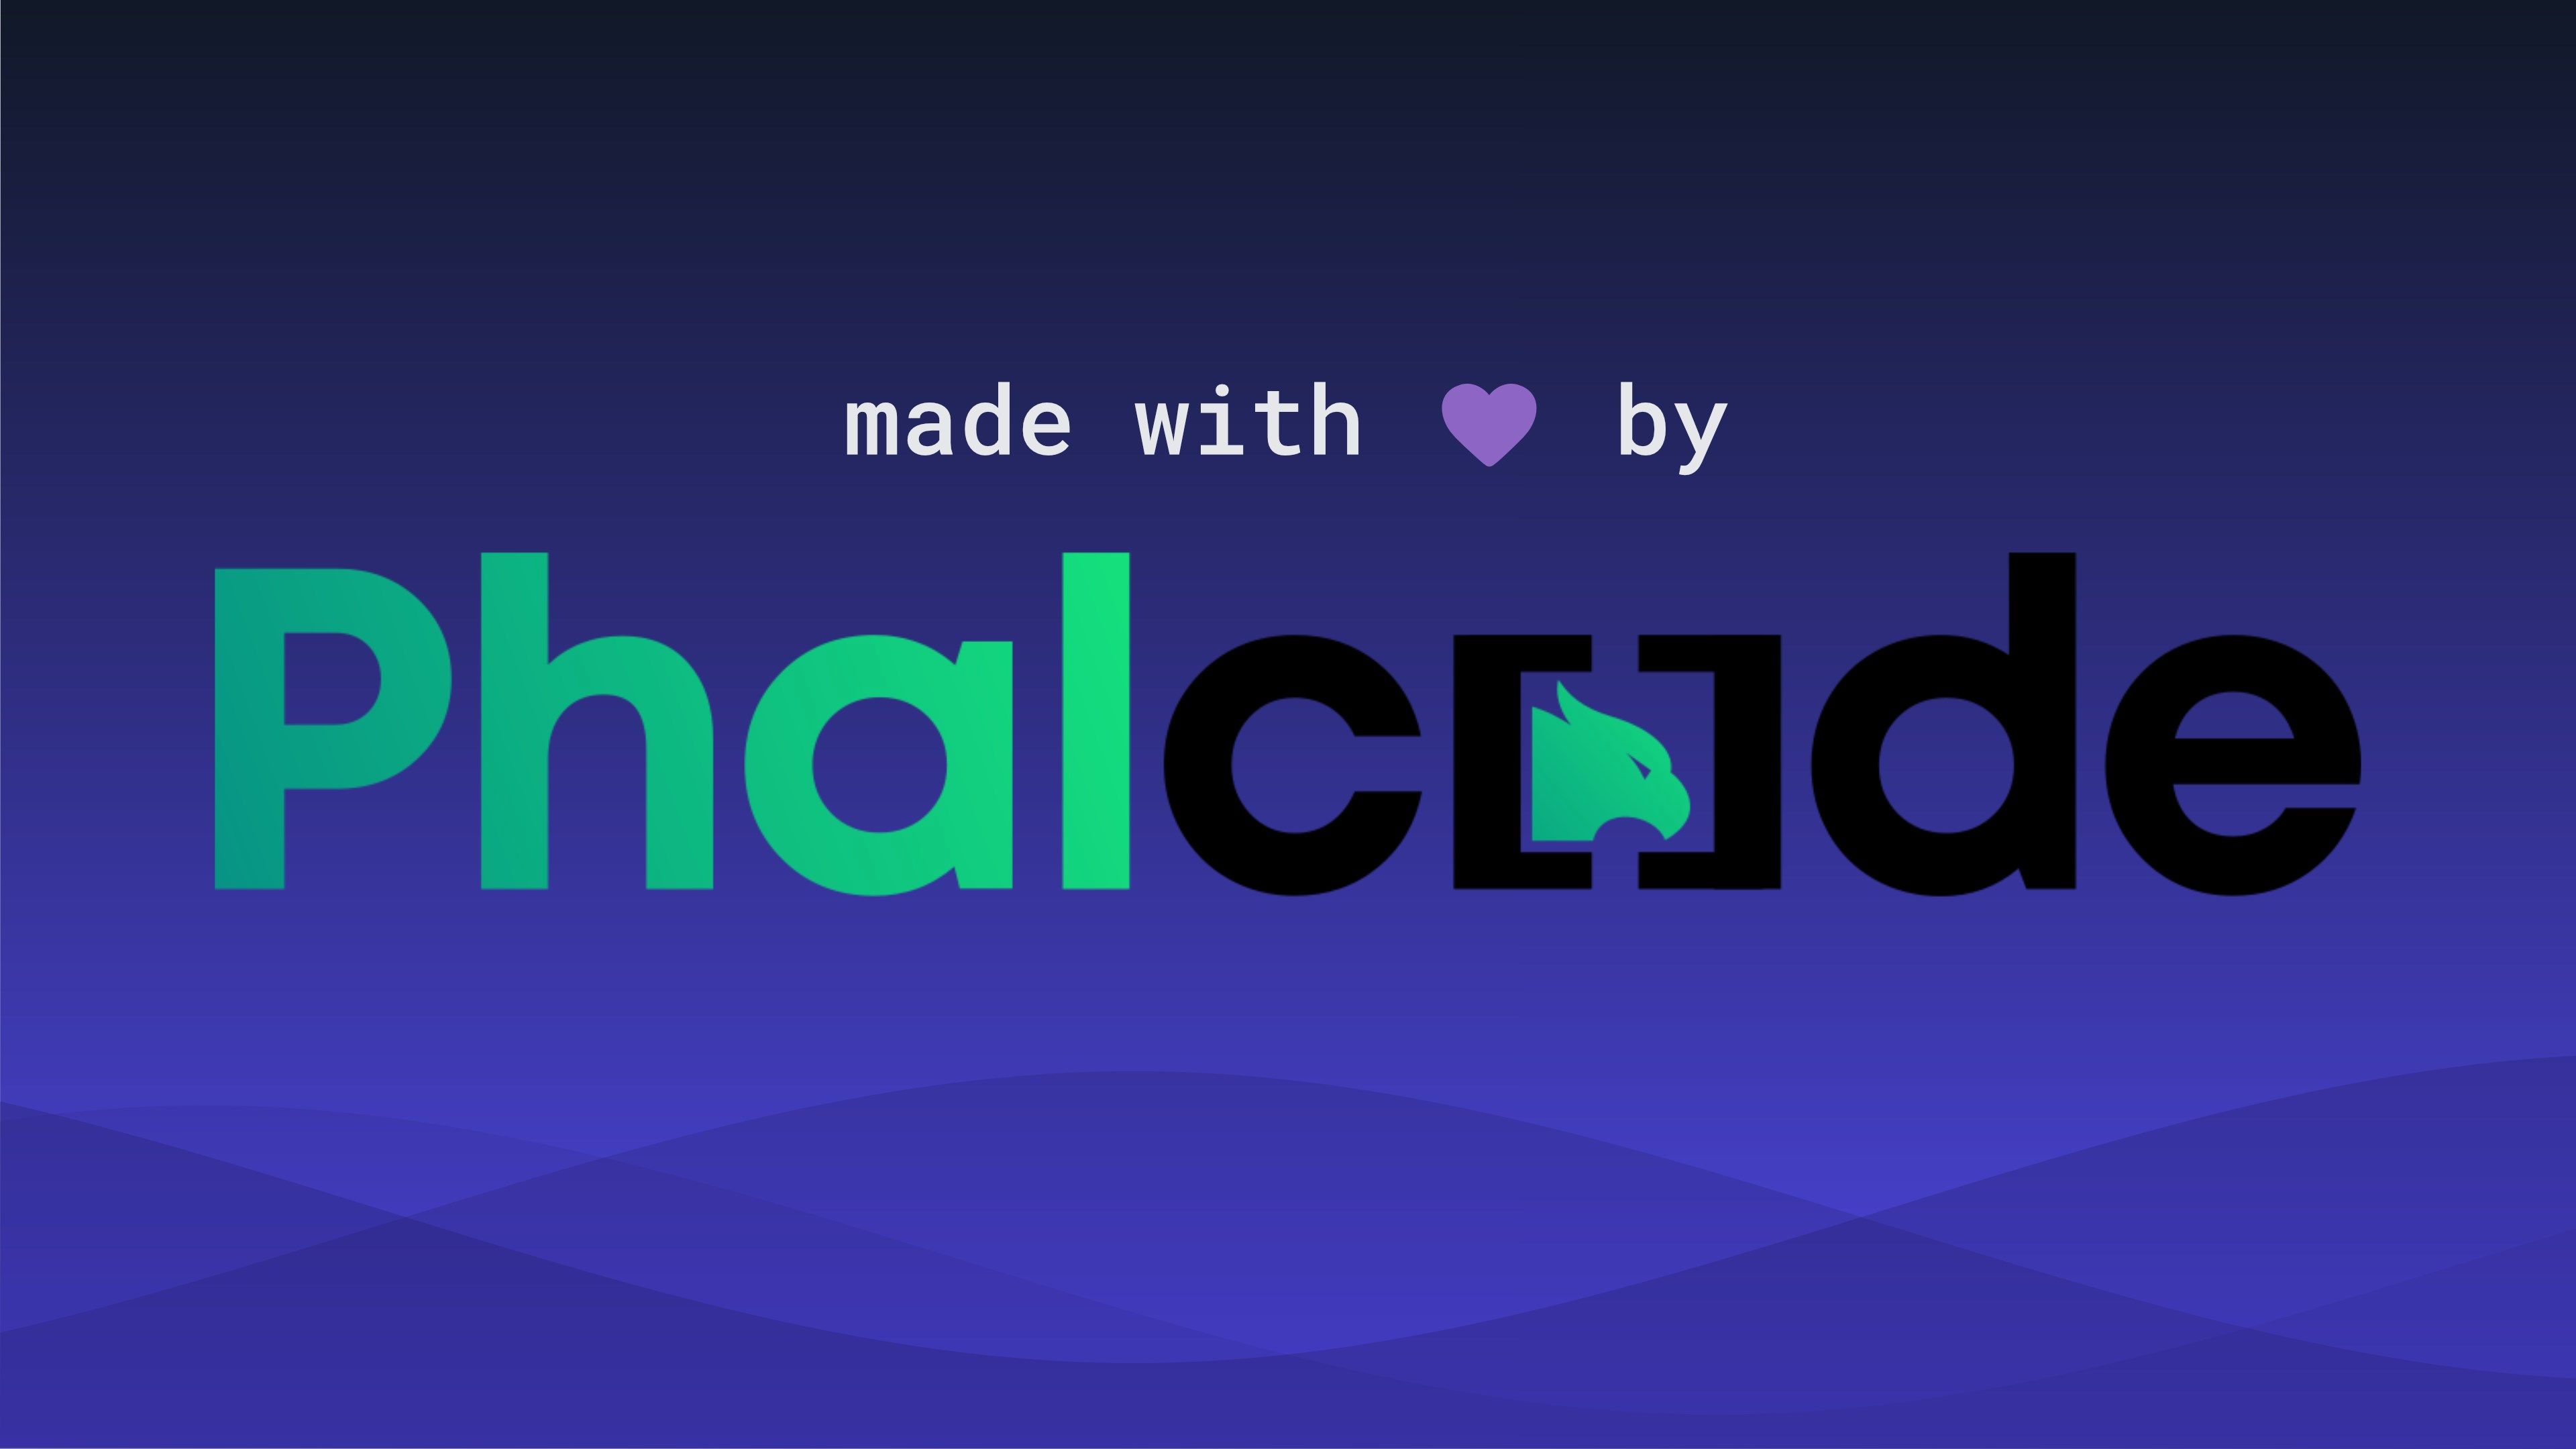 made with love by Phalcode